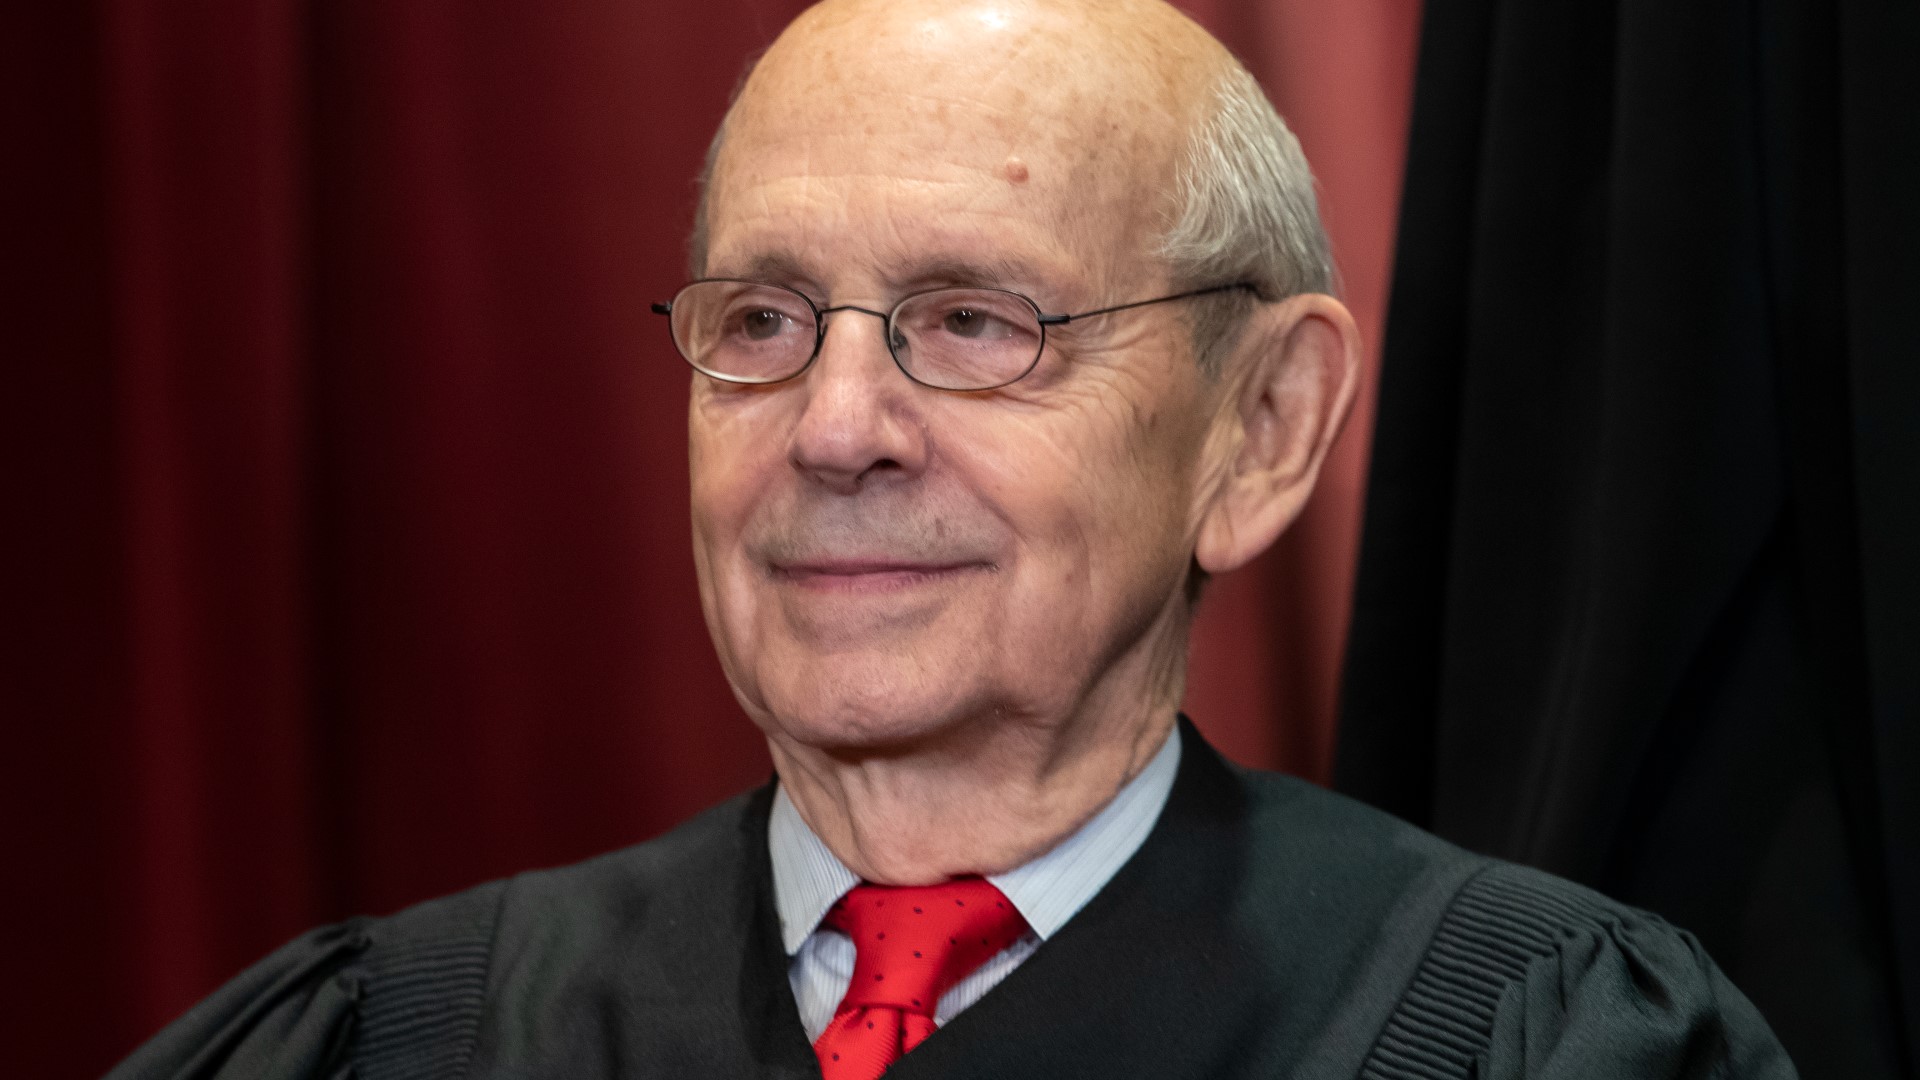 Breyer was nominated by Bill Clinton 27 years ago, and has served as one of the liberal voices on the court ever since.